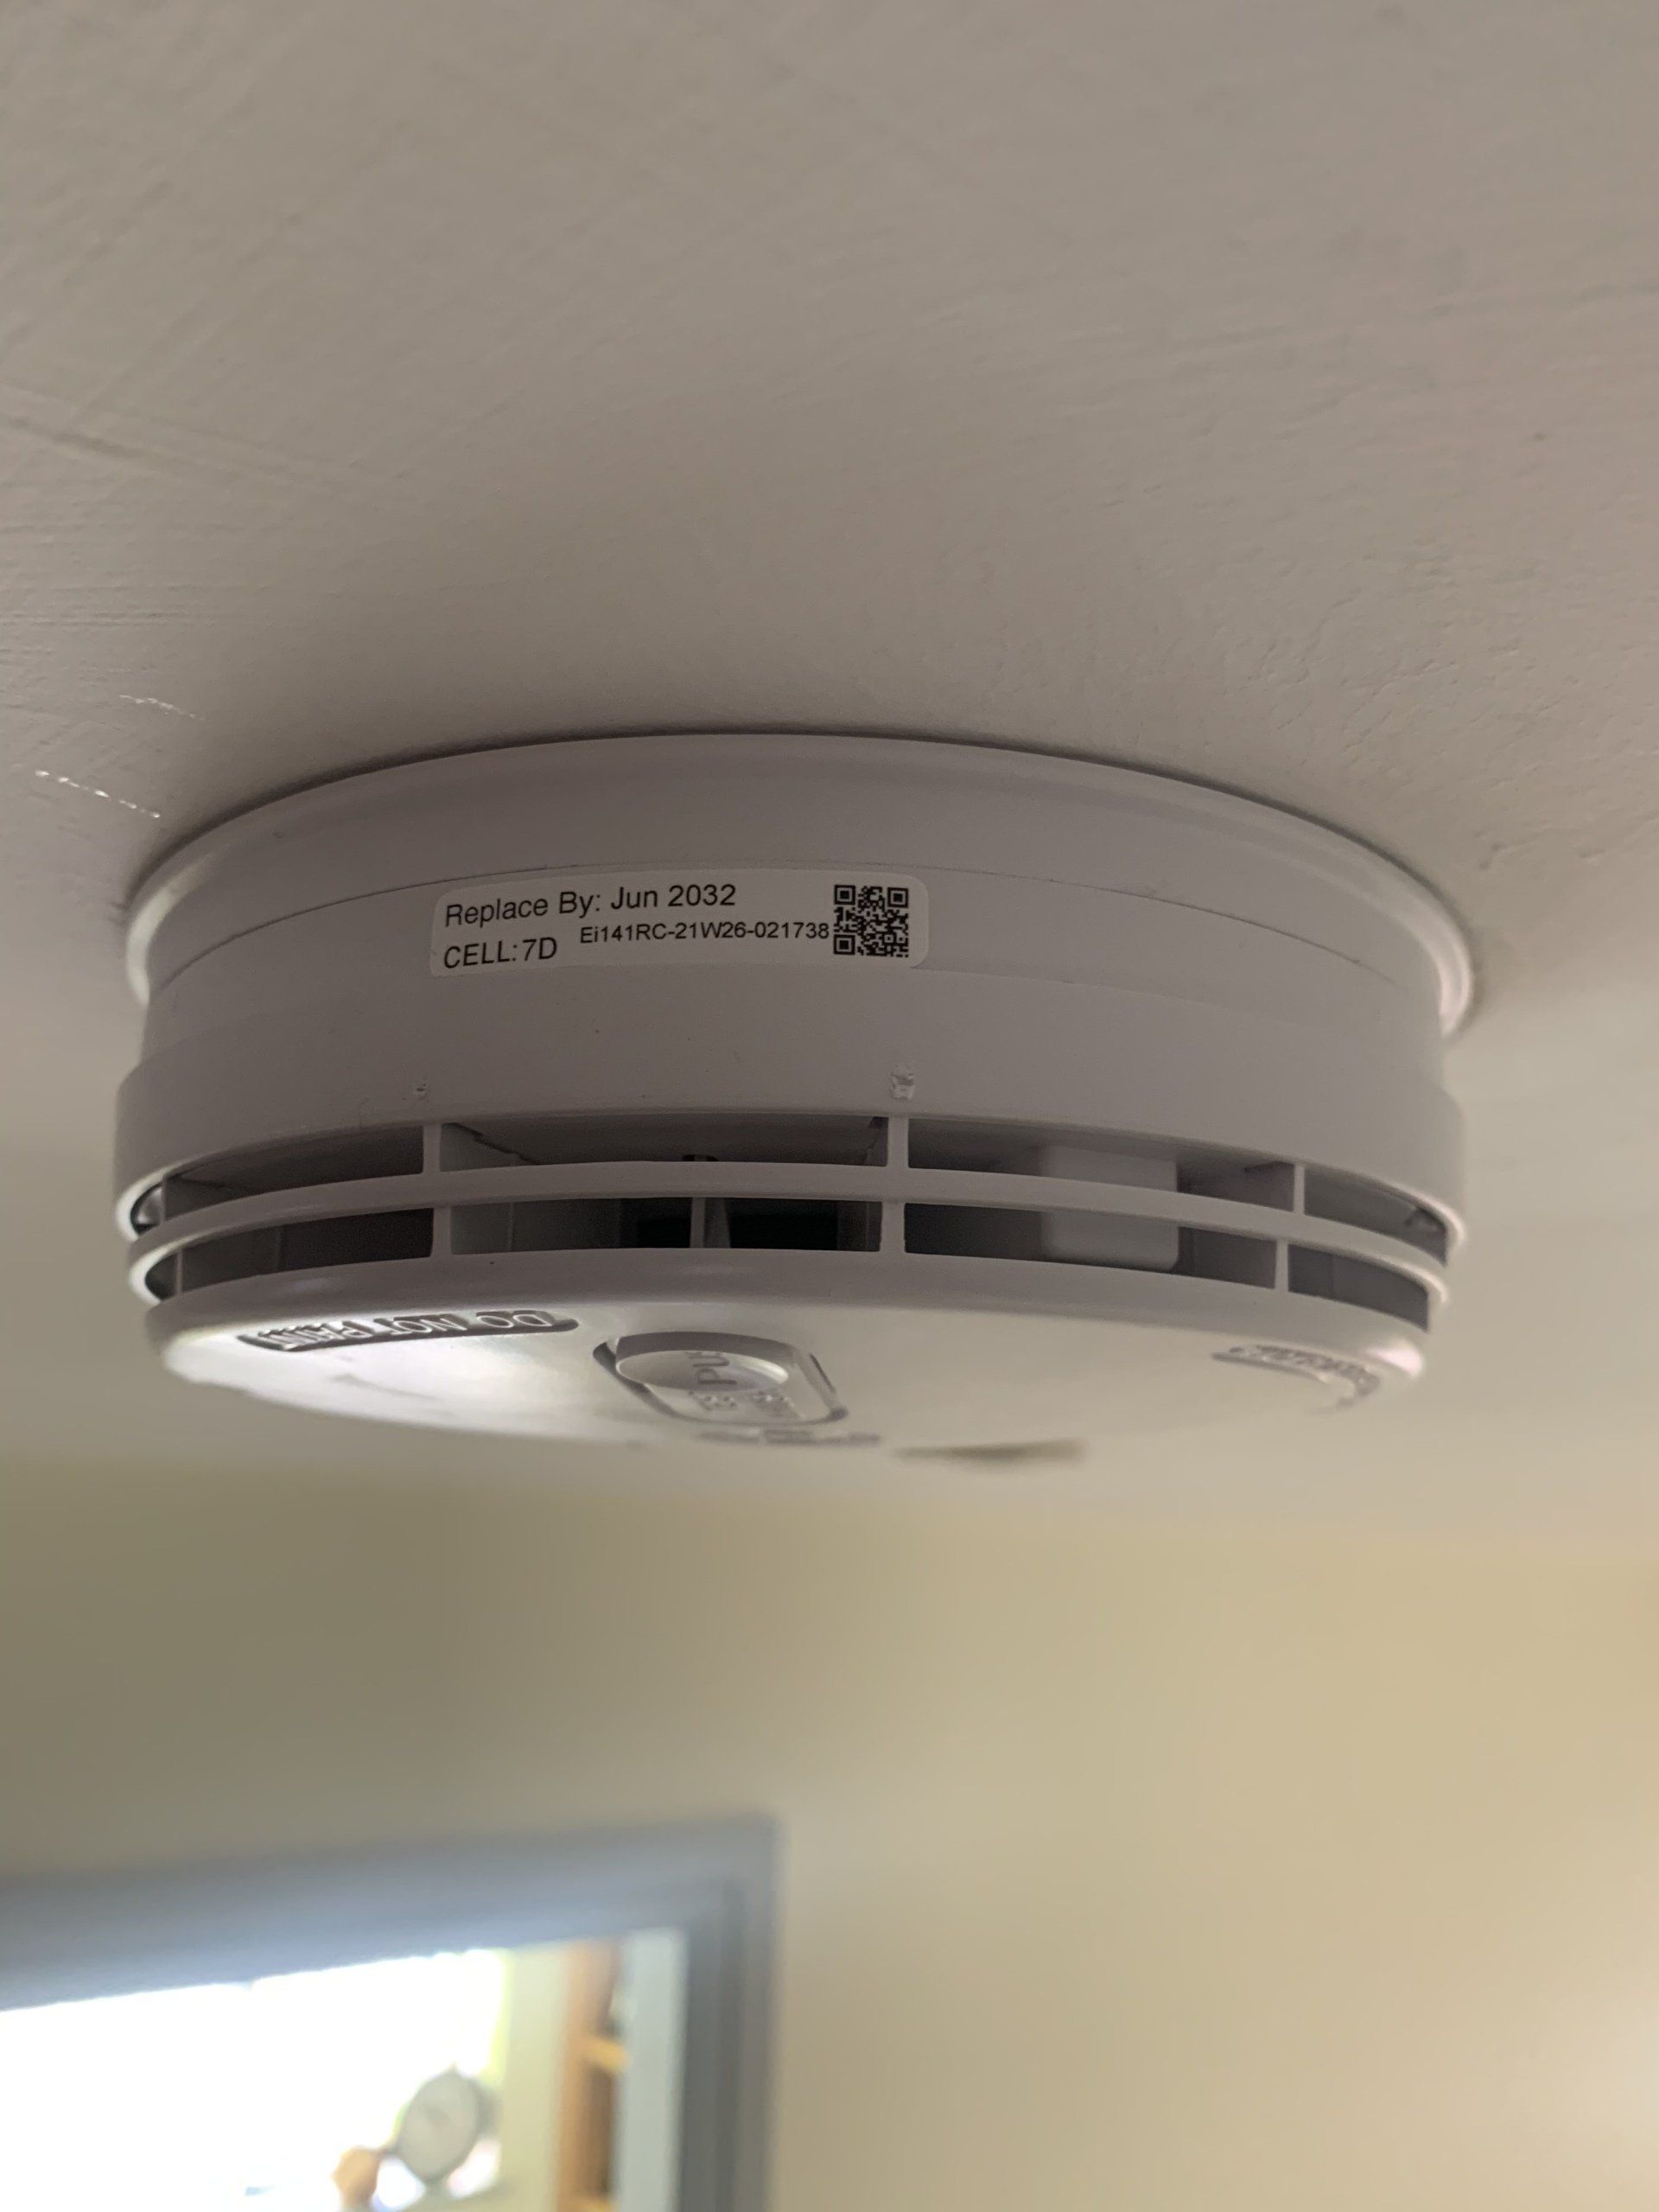 local electrician nearby installing domestic fire alarms and smoke alarms.. qualified electrician near me, domestic electrician fitting smoke alarms